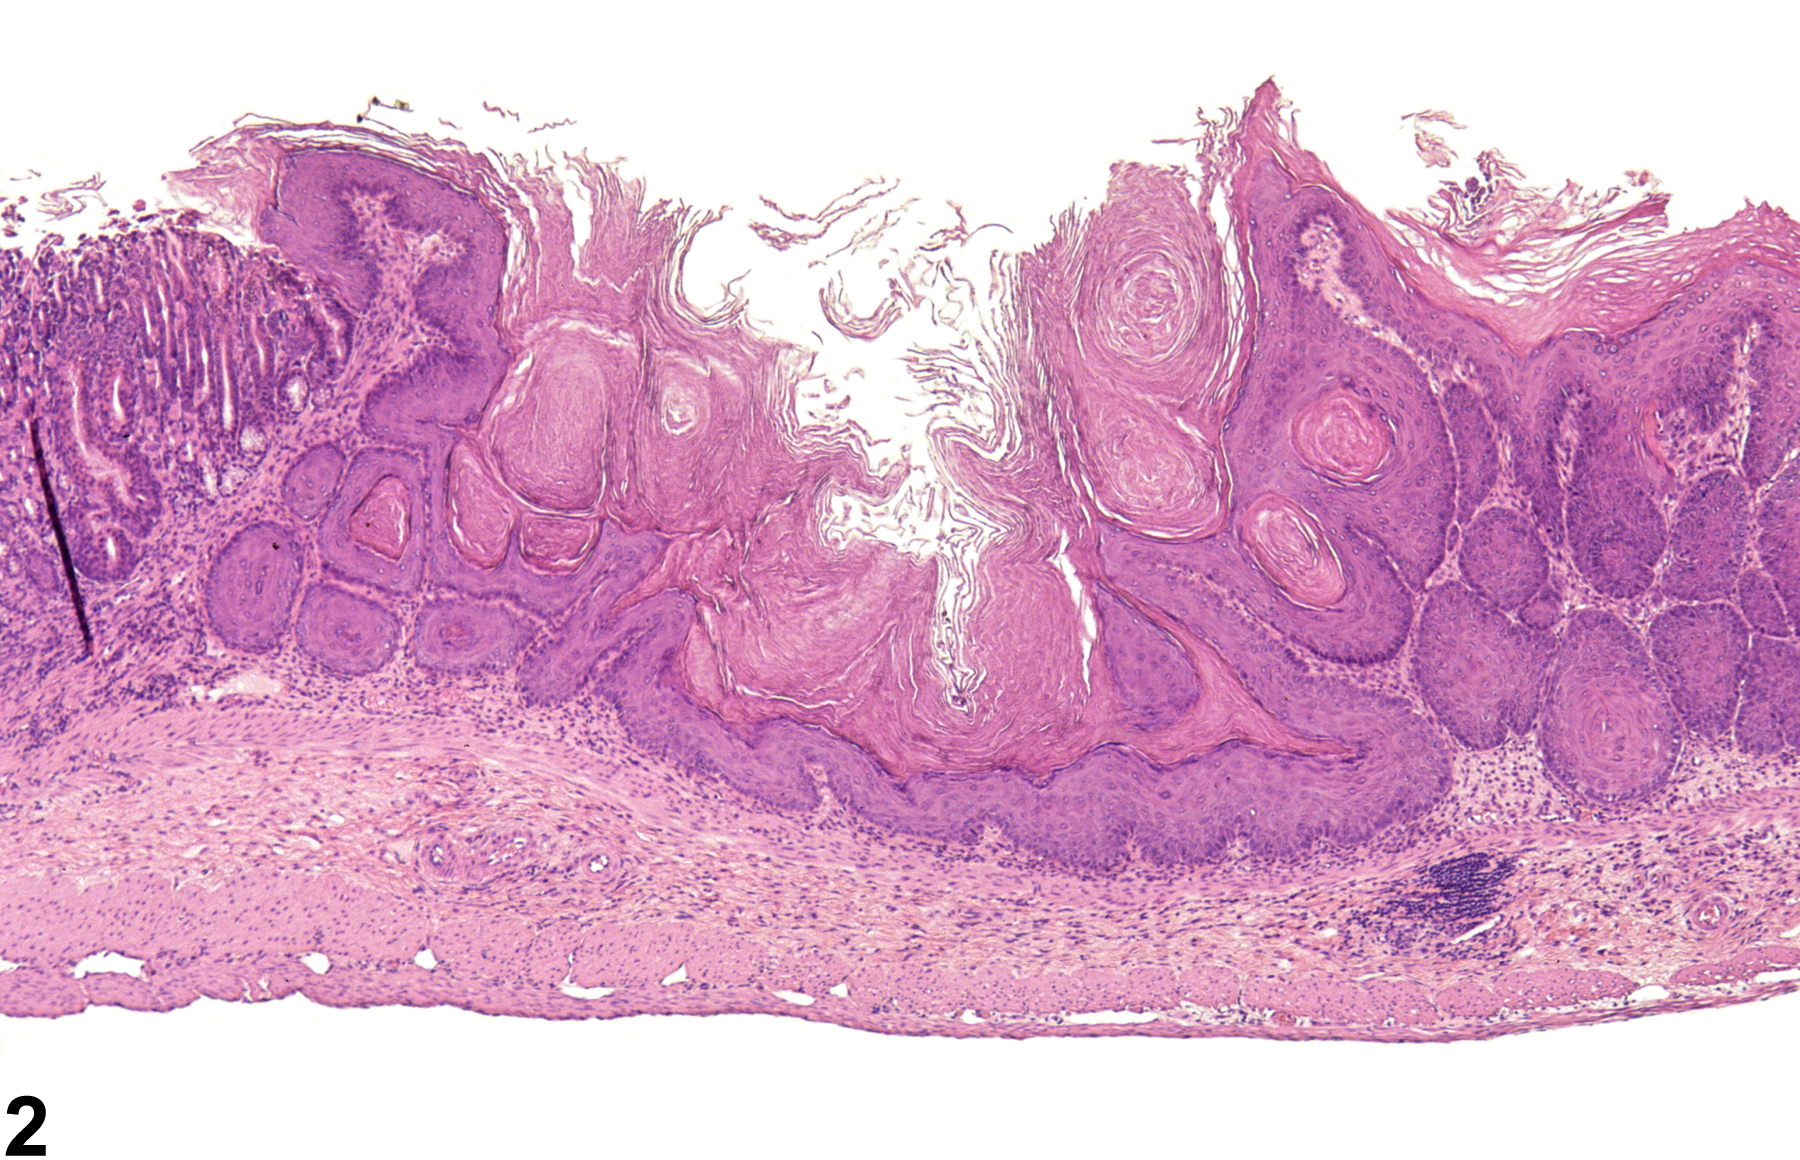 Image of hyperkeratosis in the forestomach from a male B6C3F1 mouse in a chronic study